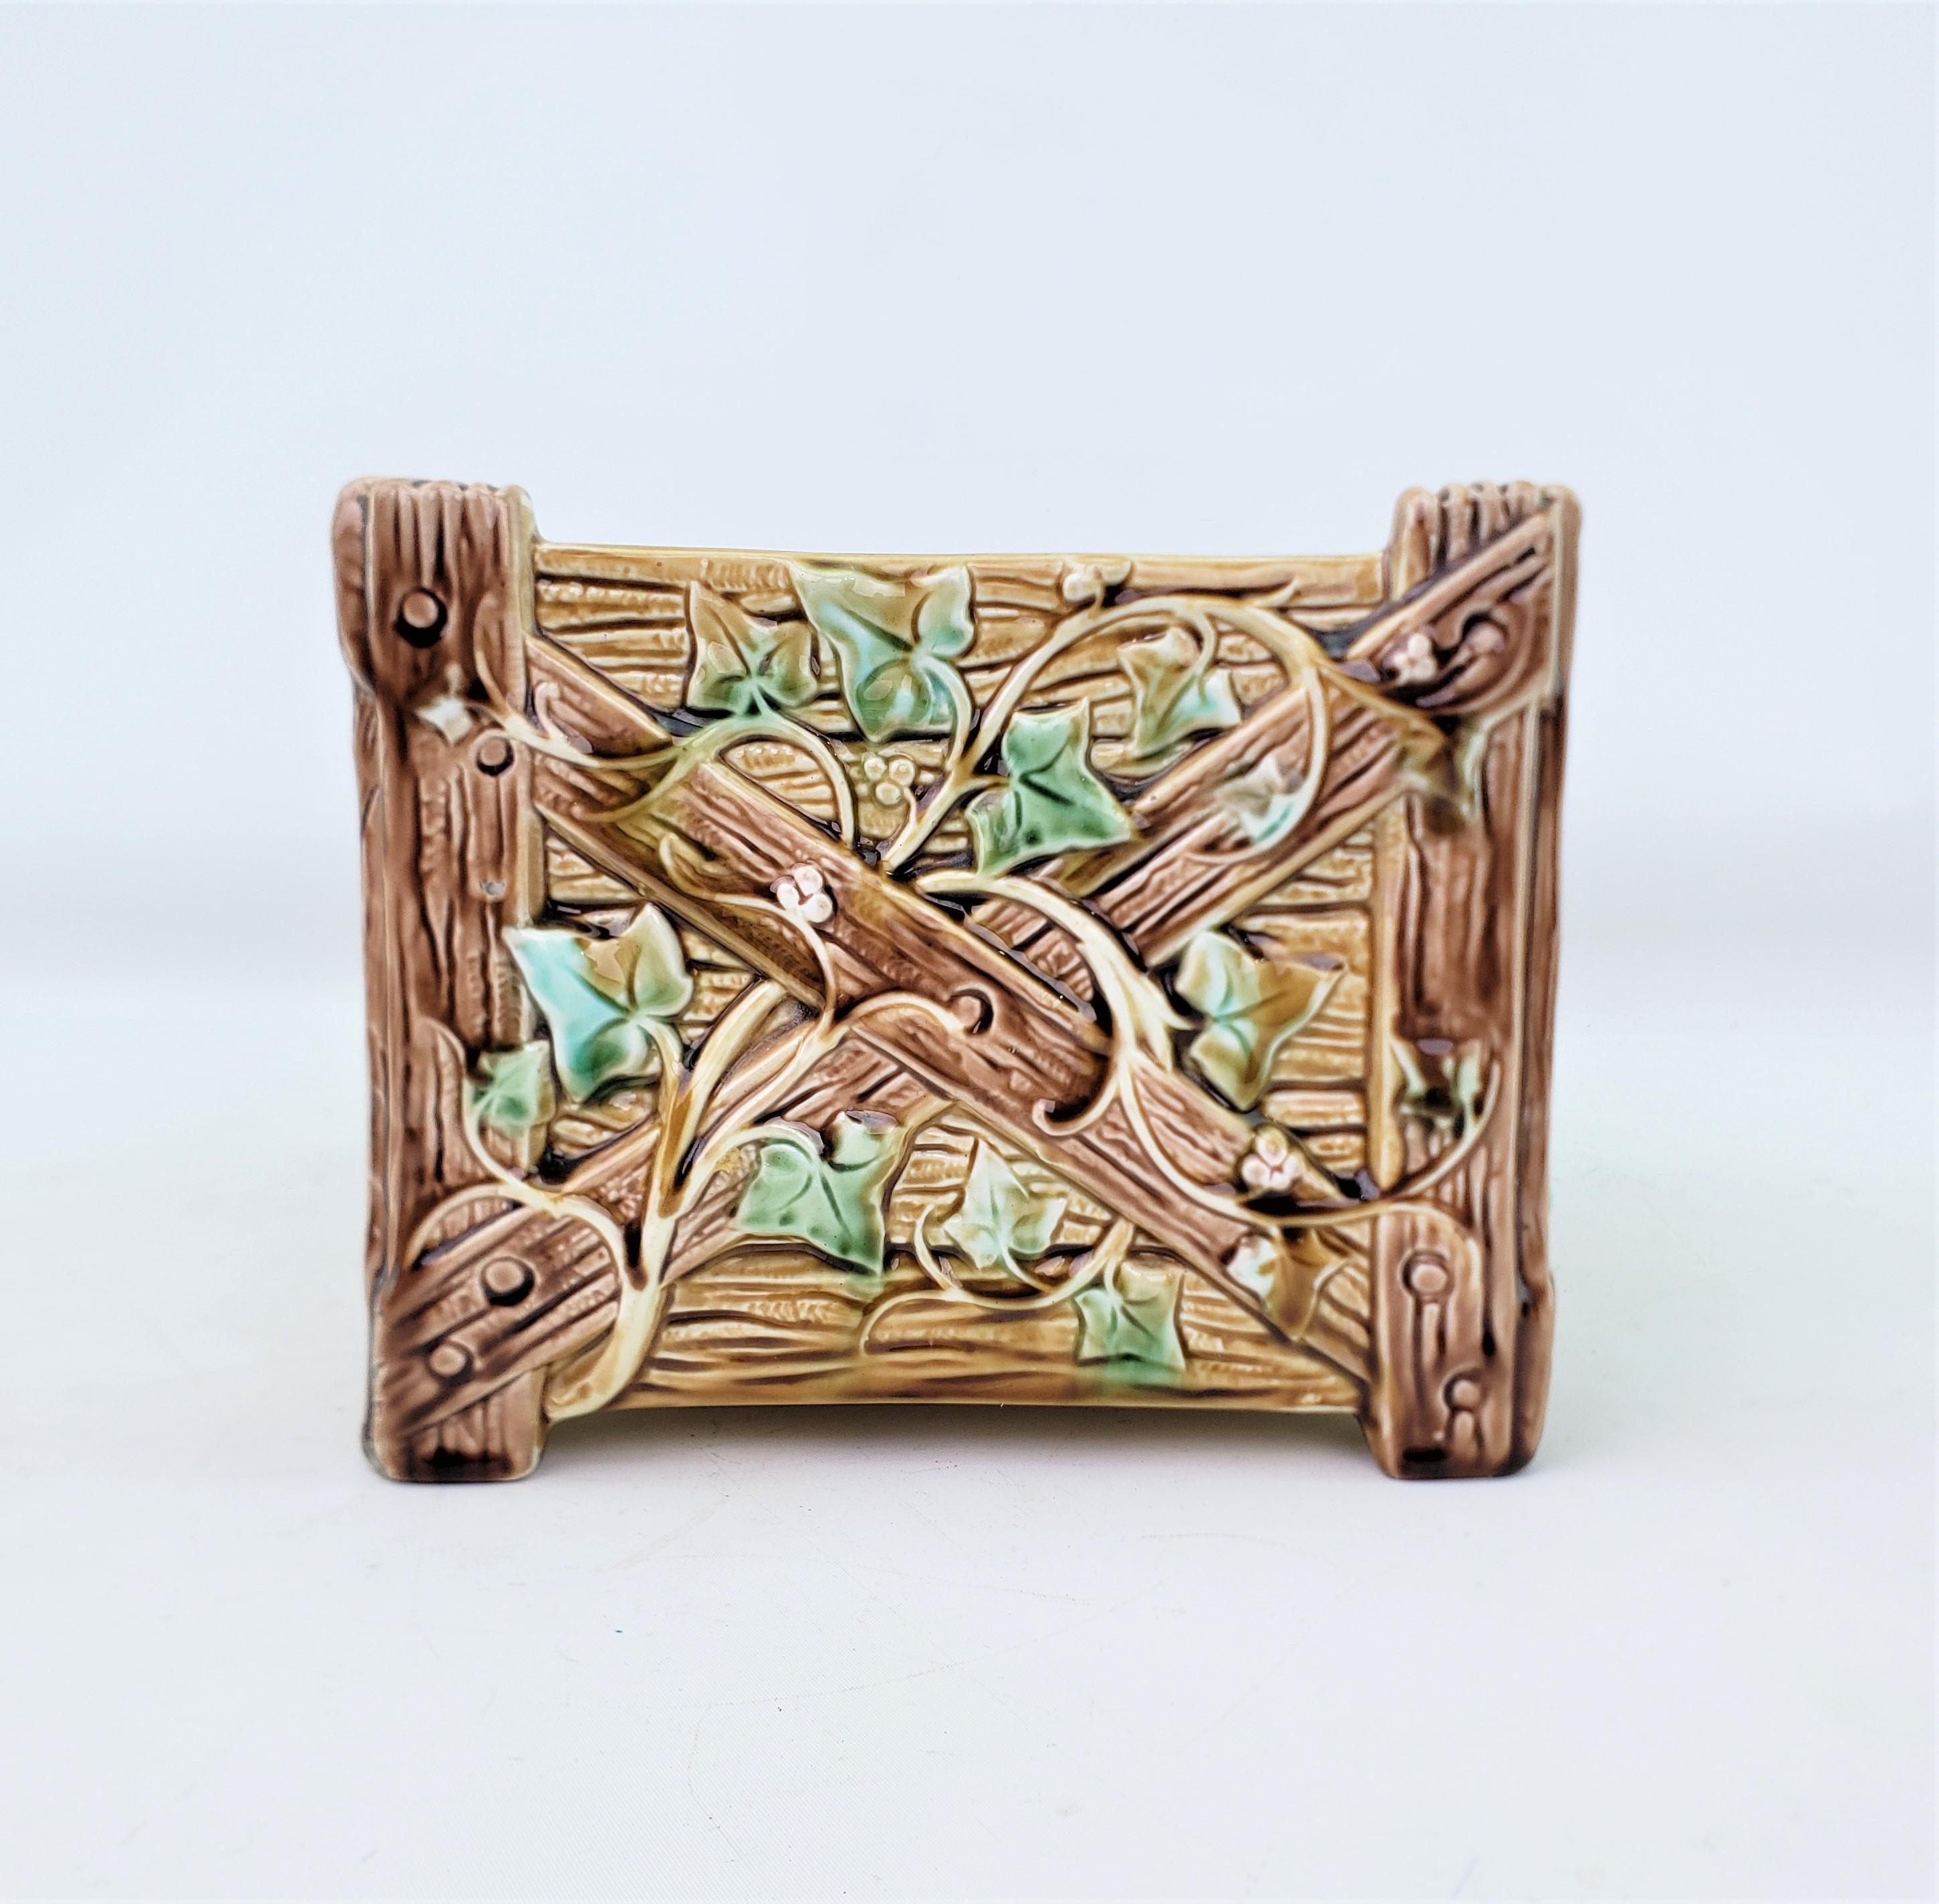 19th Century Antique English Majolica Planter or Jardiniere with a Fence & Vine Motif For Sale